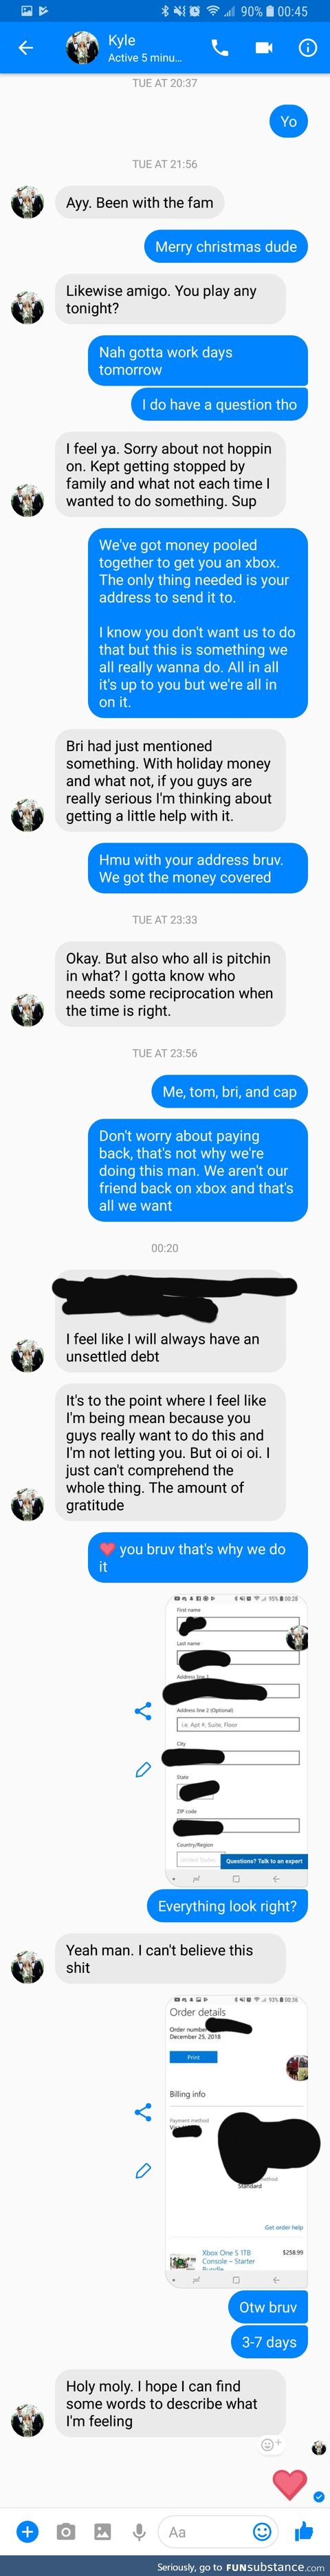 Bought one of our friends an xbox